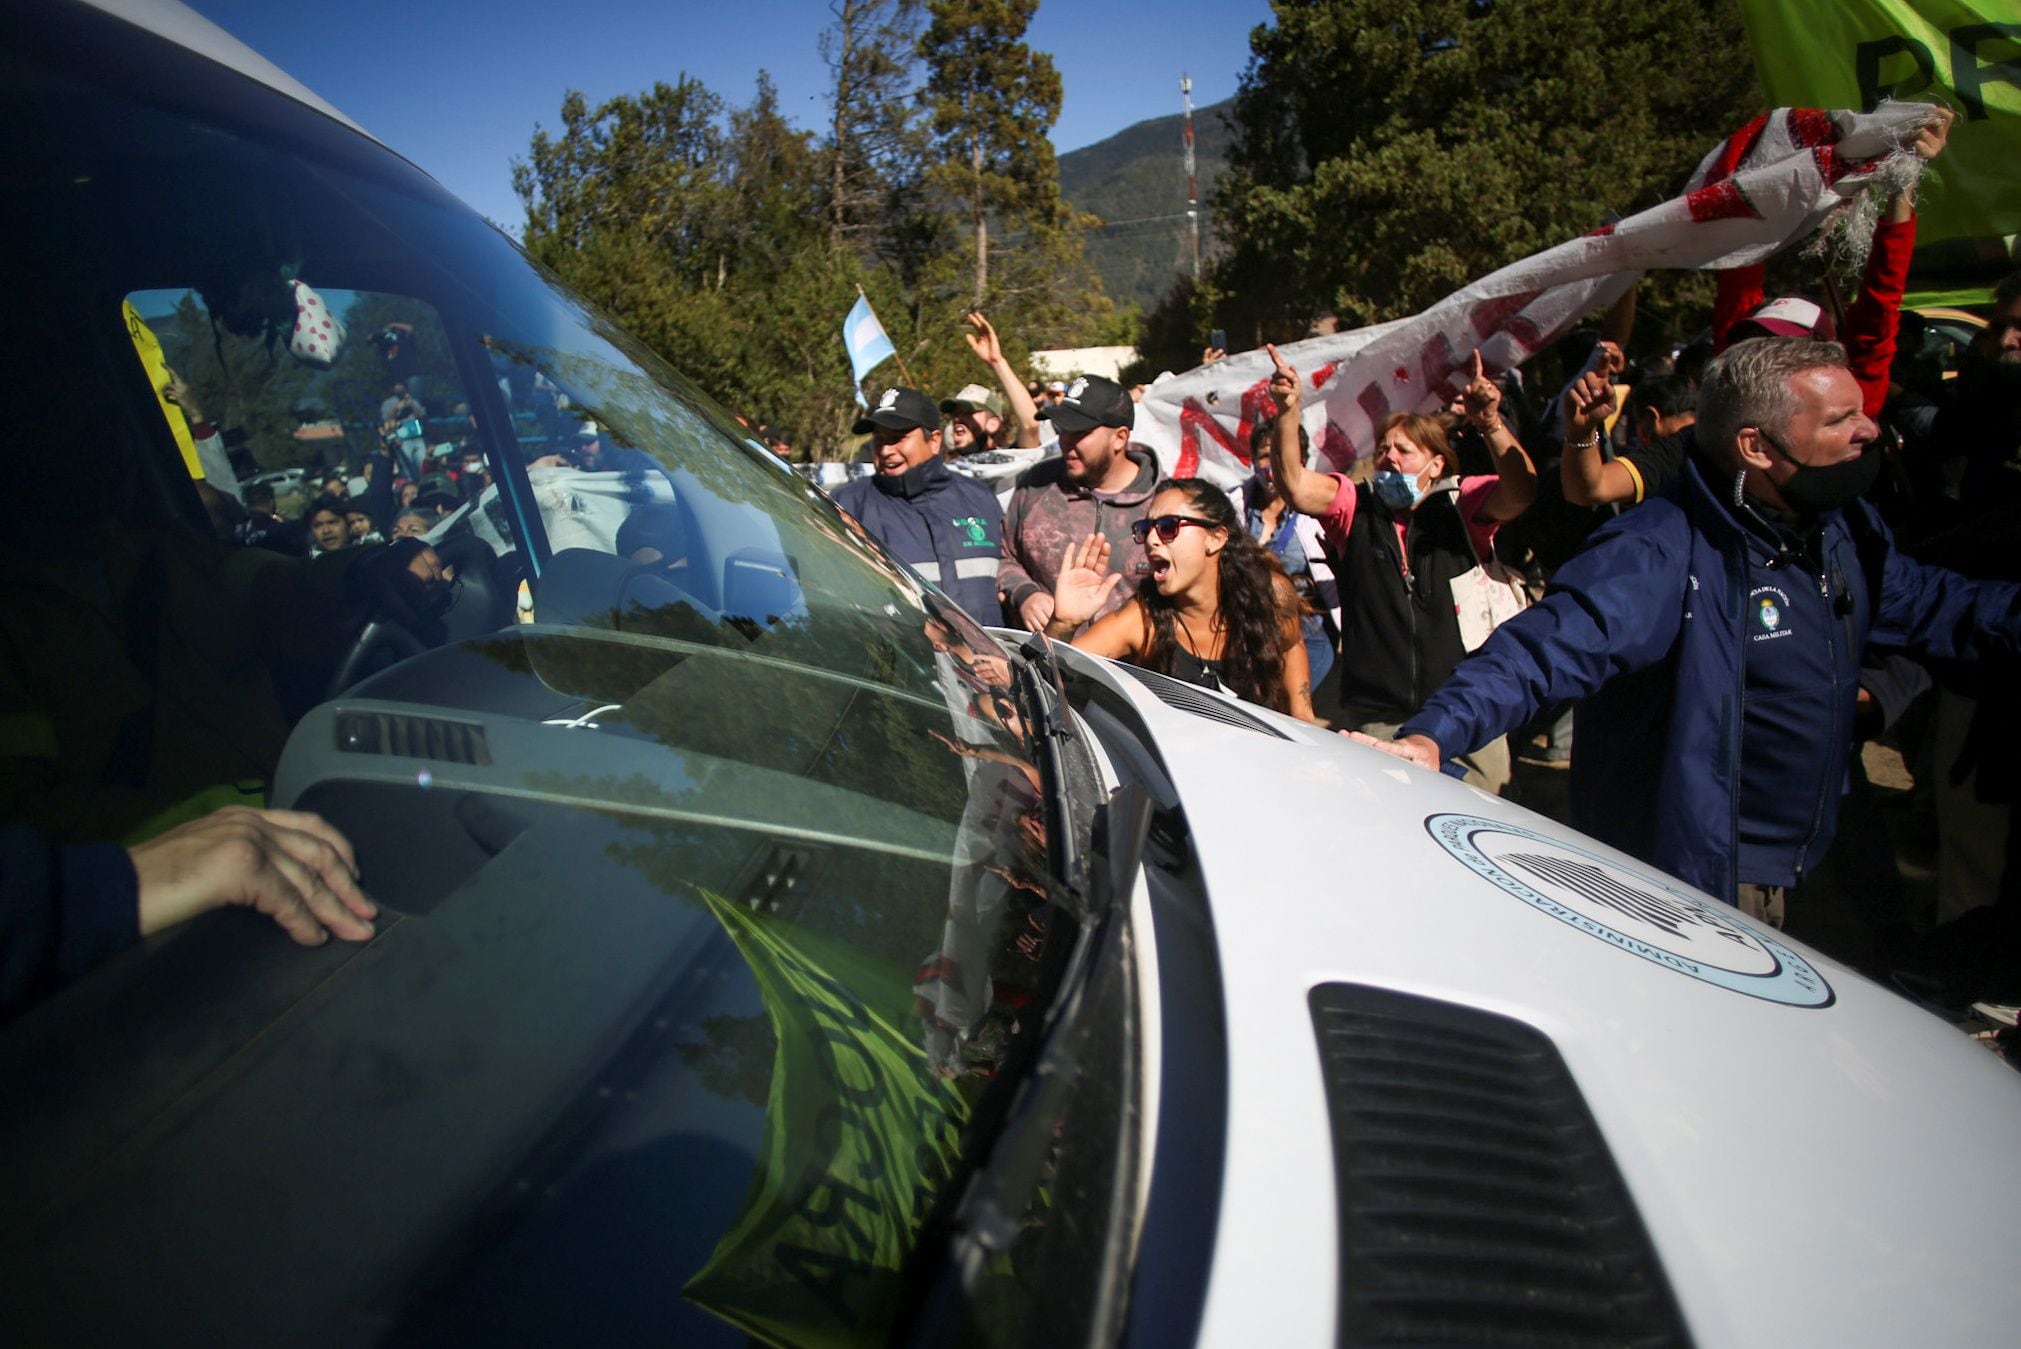 Demonstrators shout slogans to the van in which Argentina's President Alberto Fernandez is transported in Lago Puelo, to monitor the lands that were ravaged by fires, in the province of Chubut, Argentina March 13, 2021. REUTERS/Matias Garay  NO RESALES. NO ARCHIVES